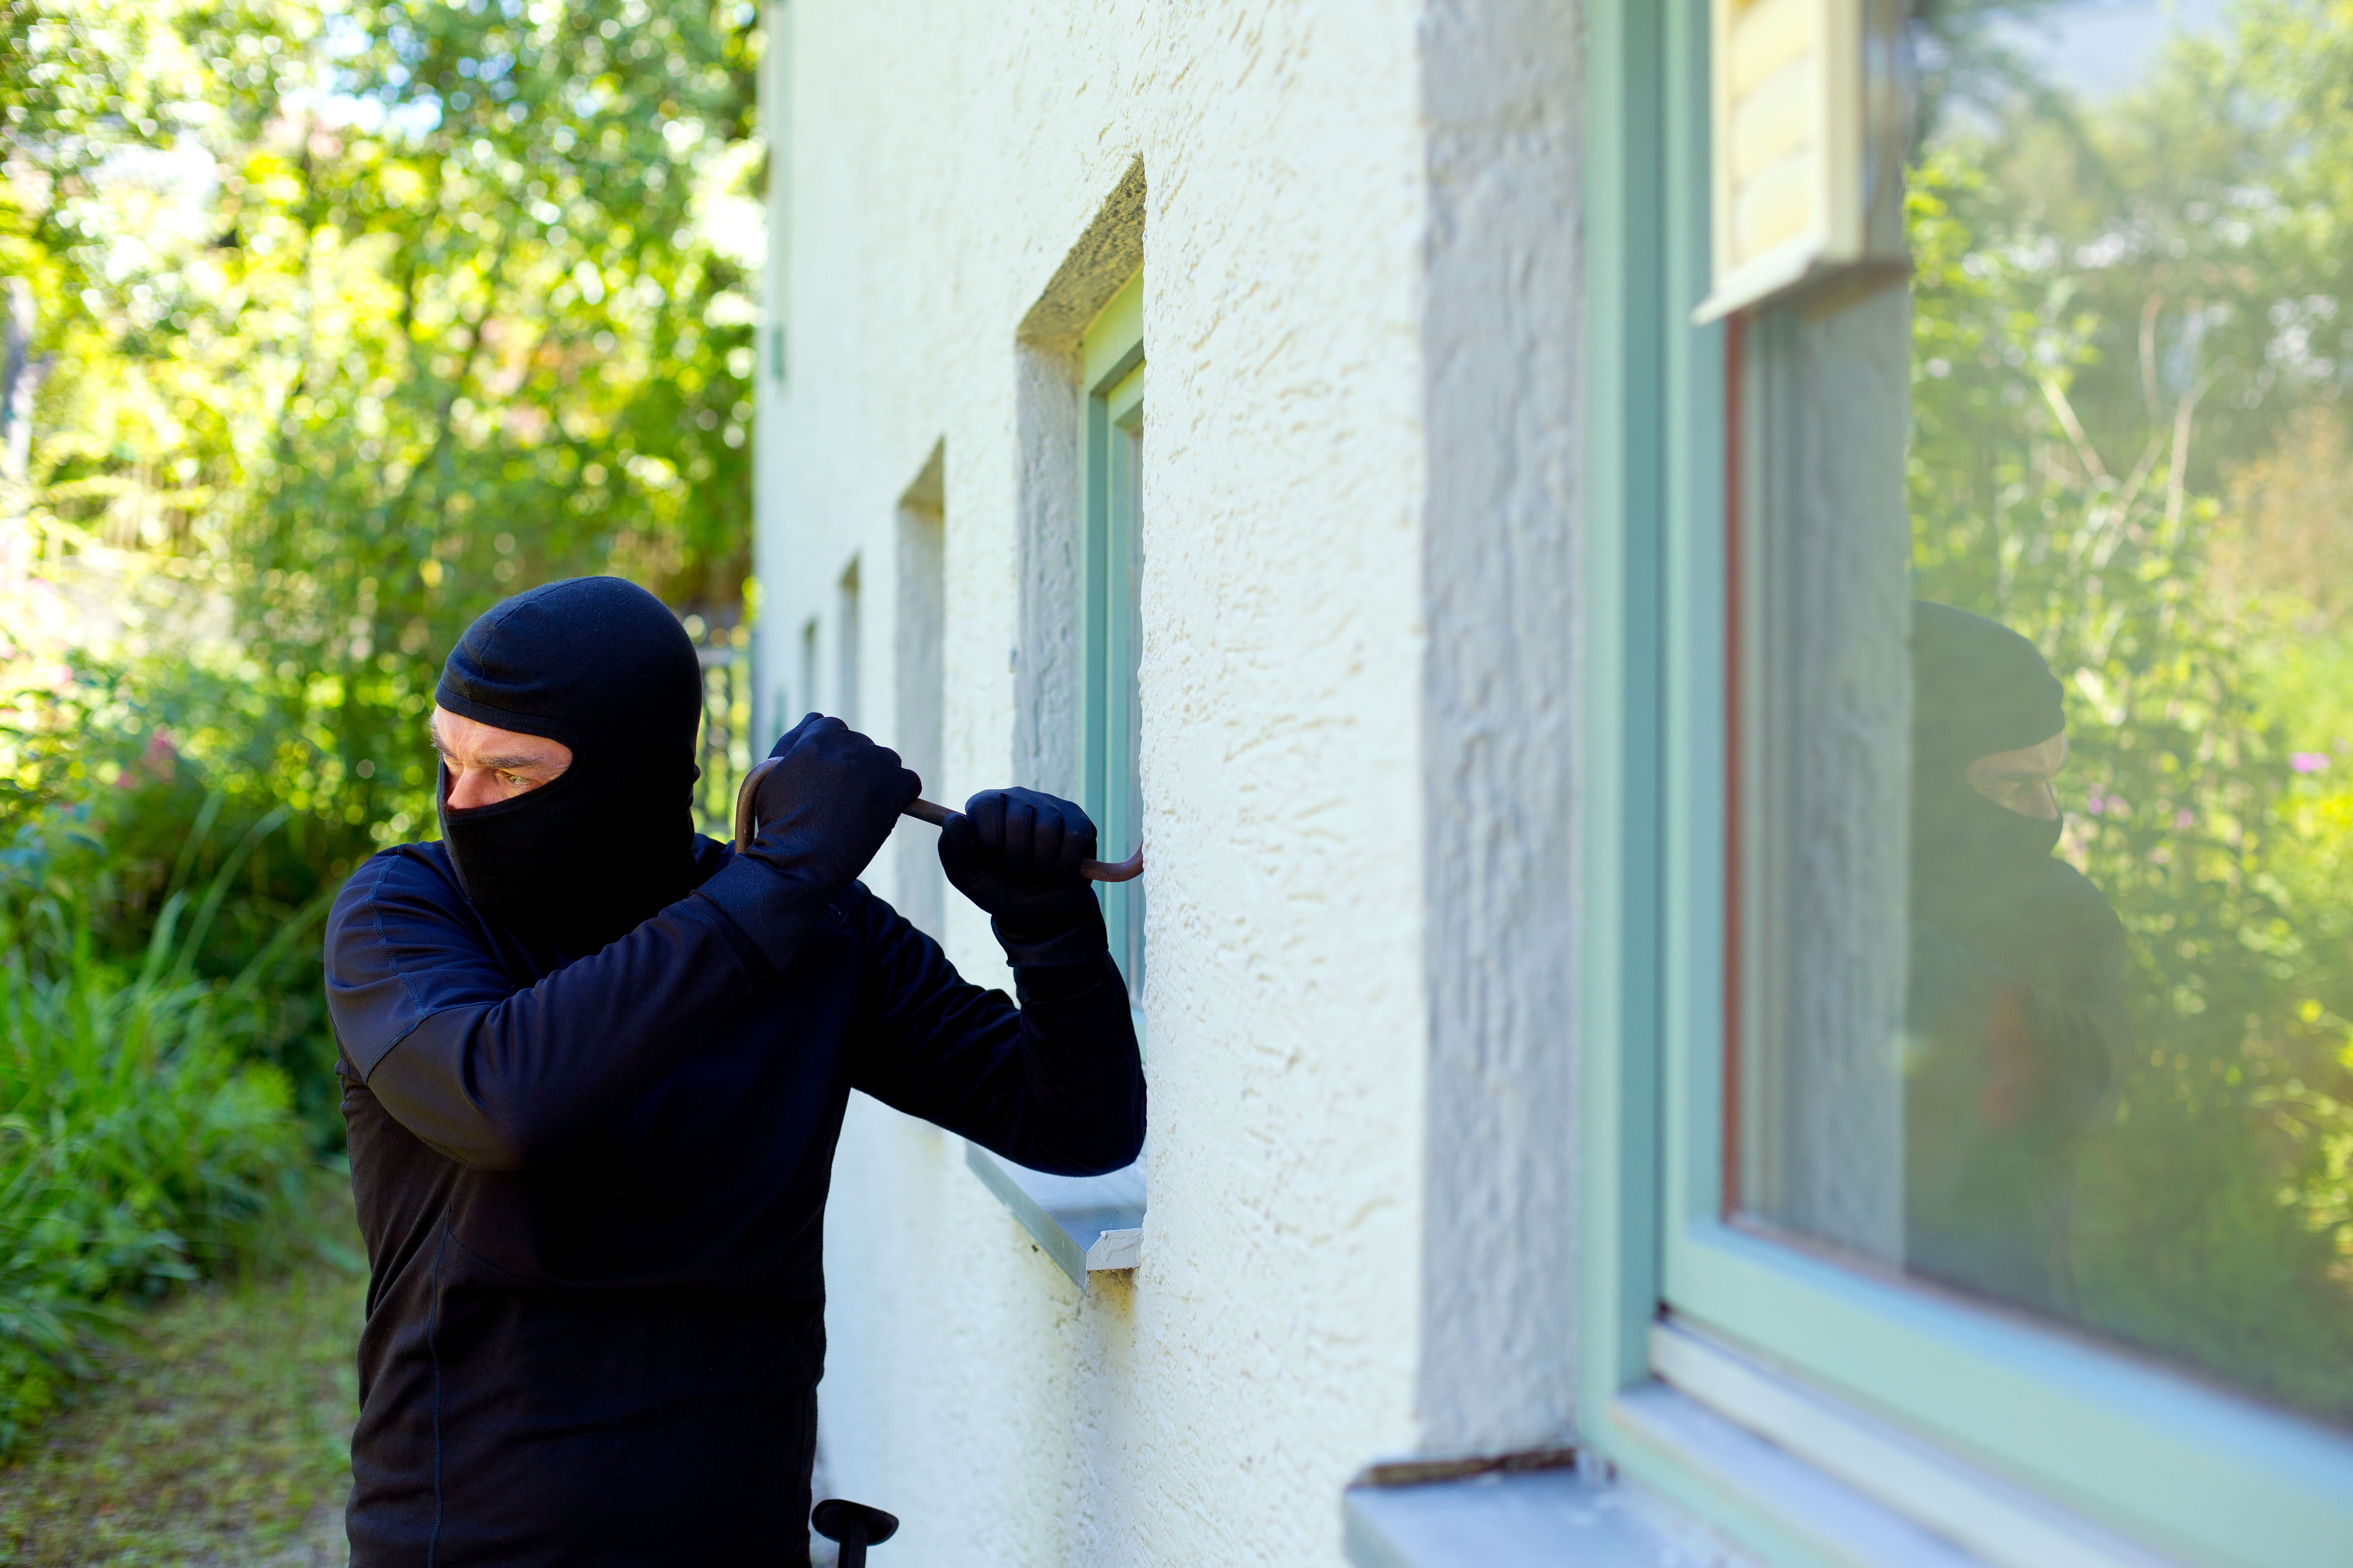 Burglary vs. Robbery: What's the Difference and How Can You Prevent Them?